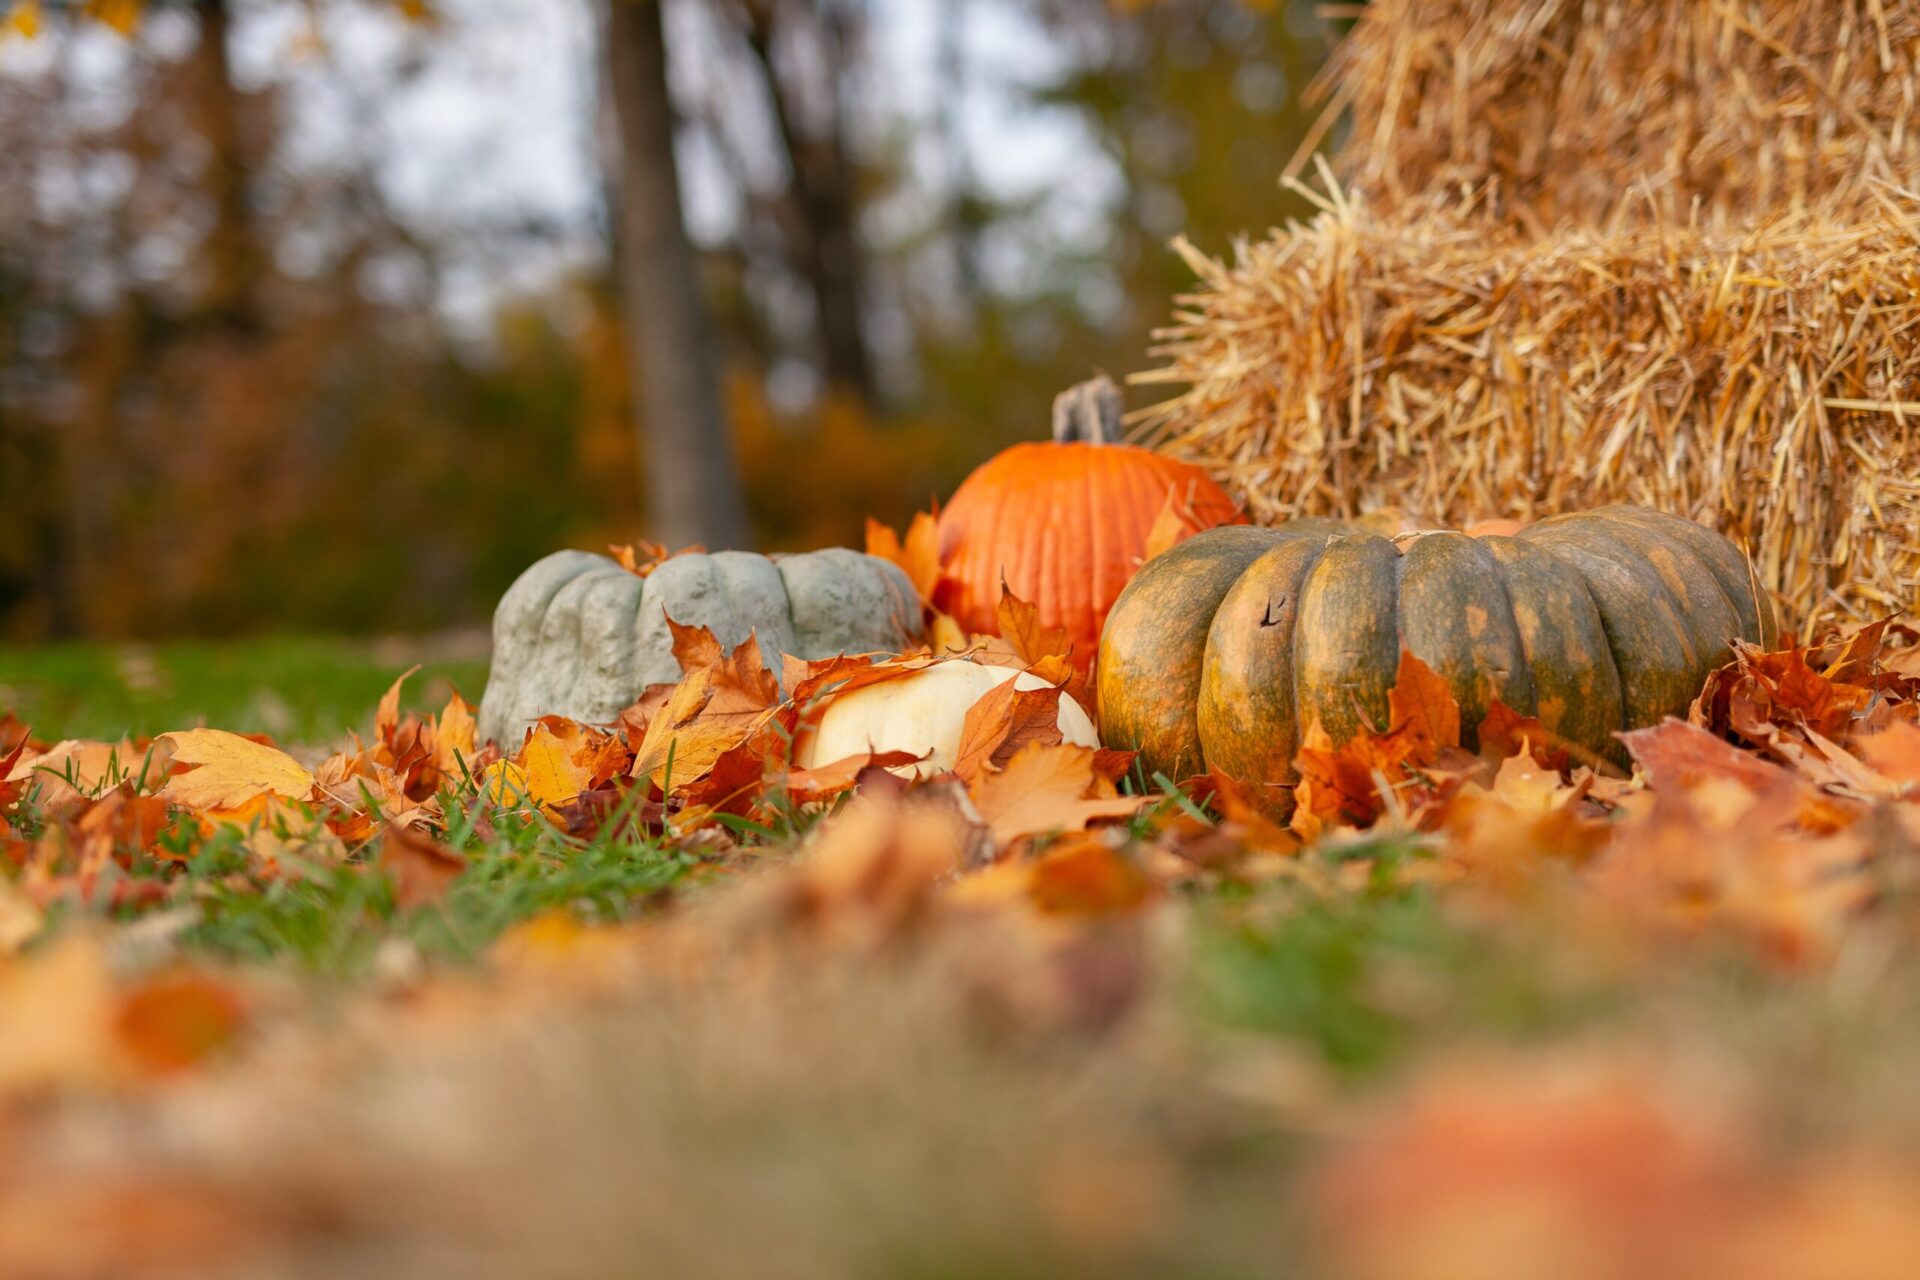 A gathering of four small pumpkins, one orange, two gray, and one white, against two haystacks. In the grass, orange and brown leaves are visible.